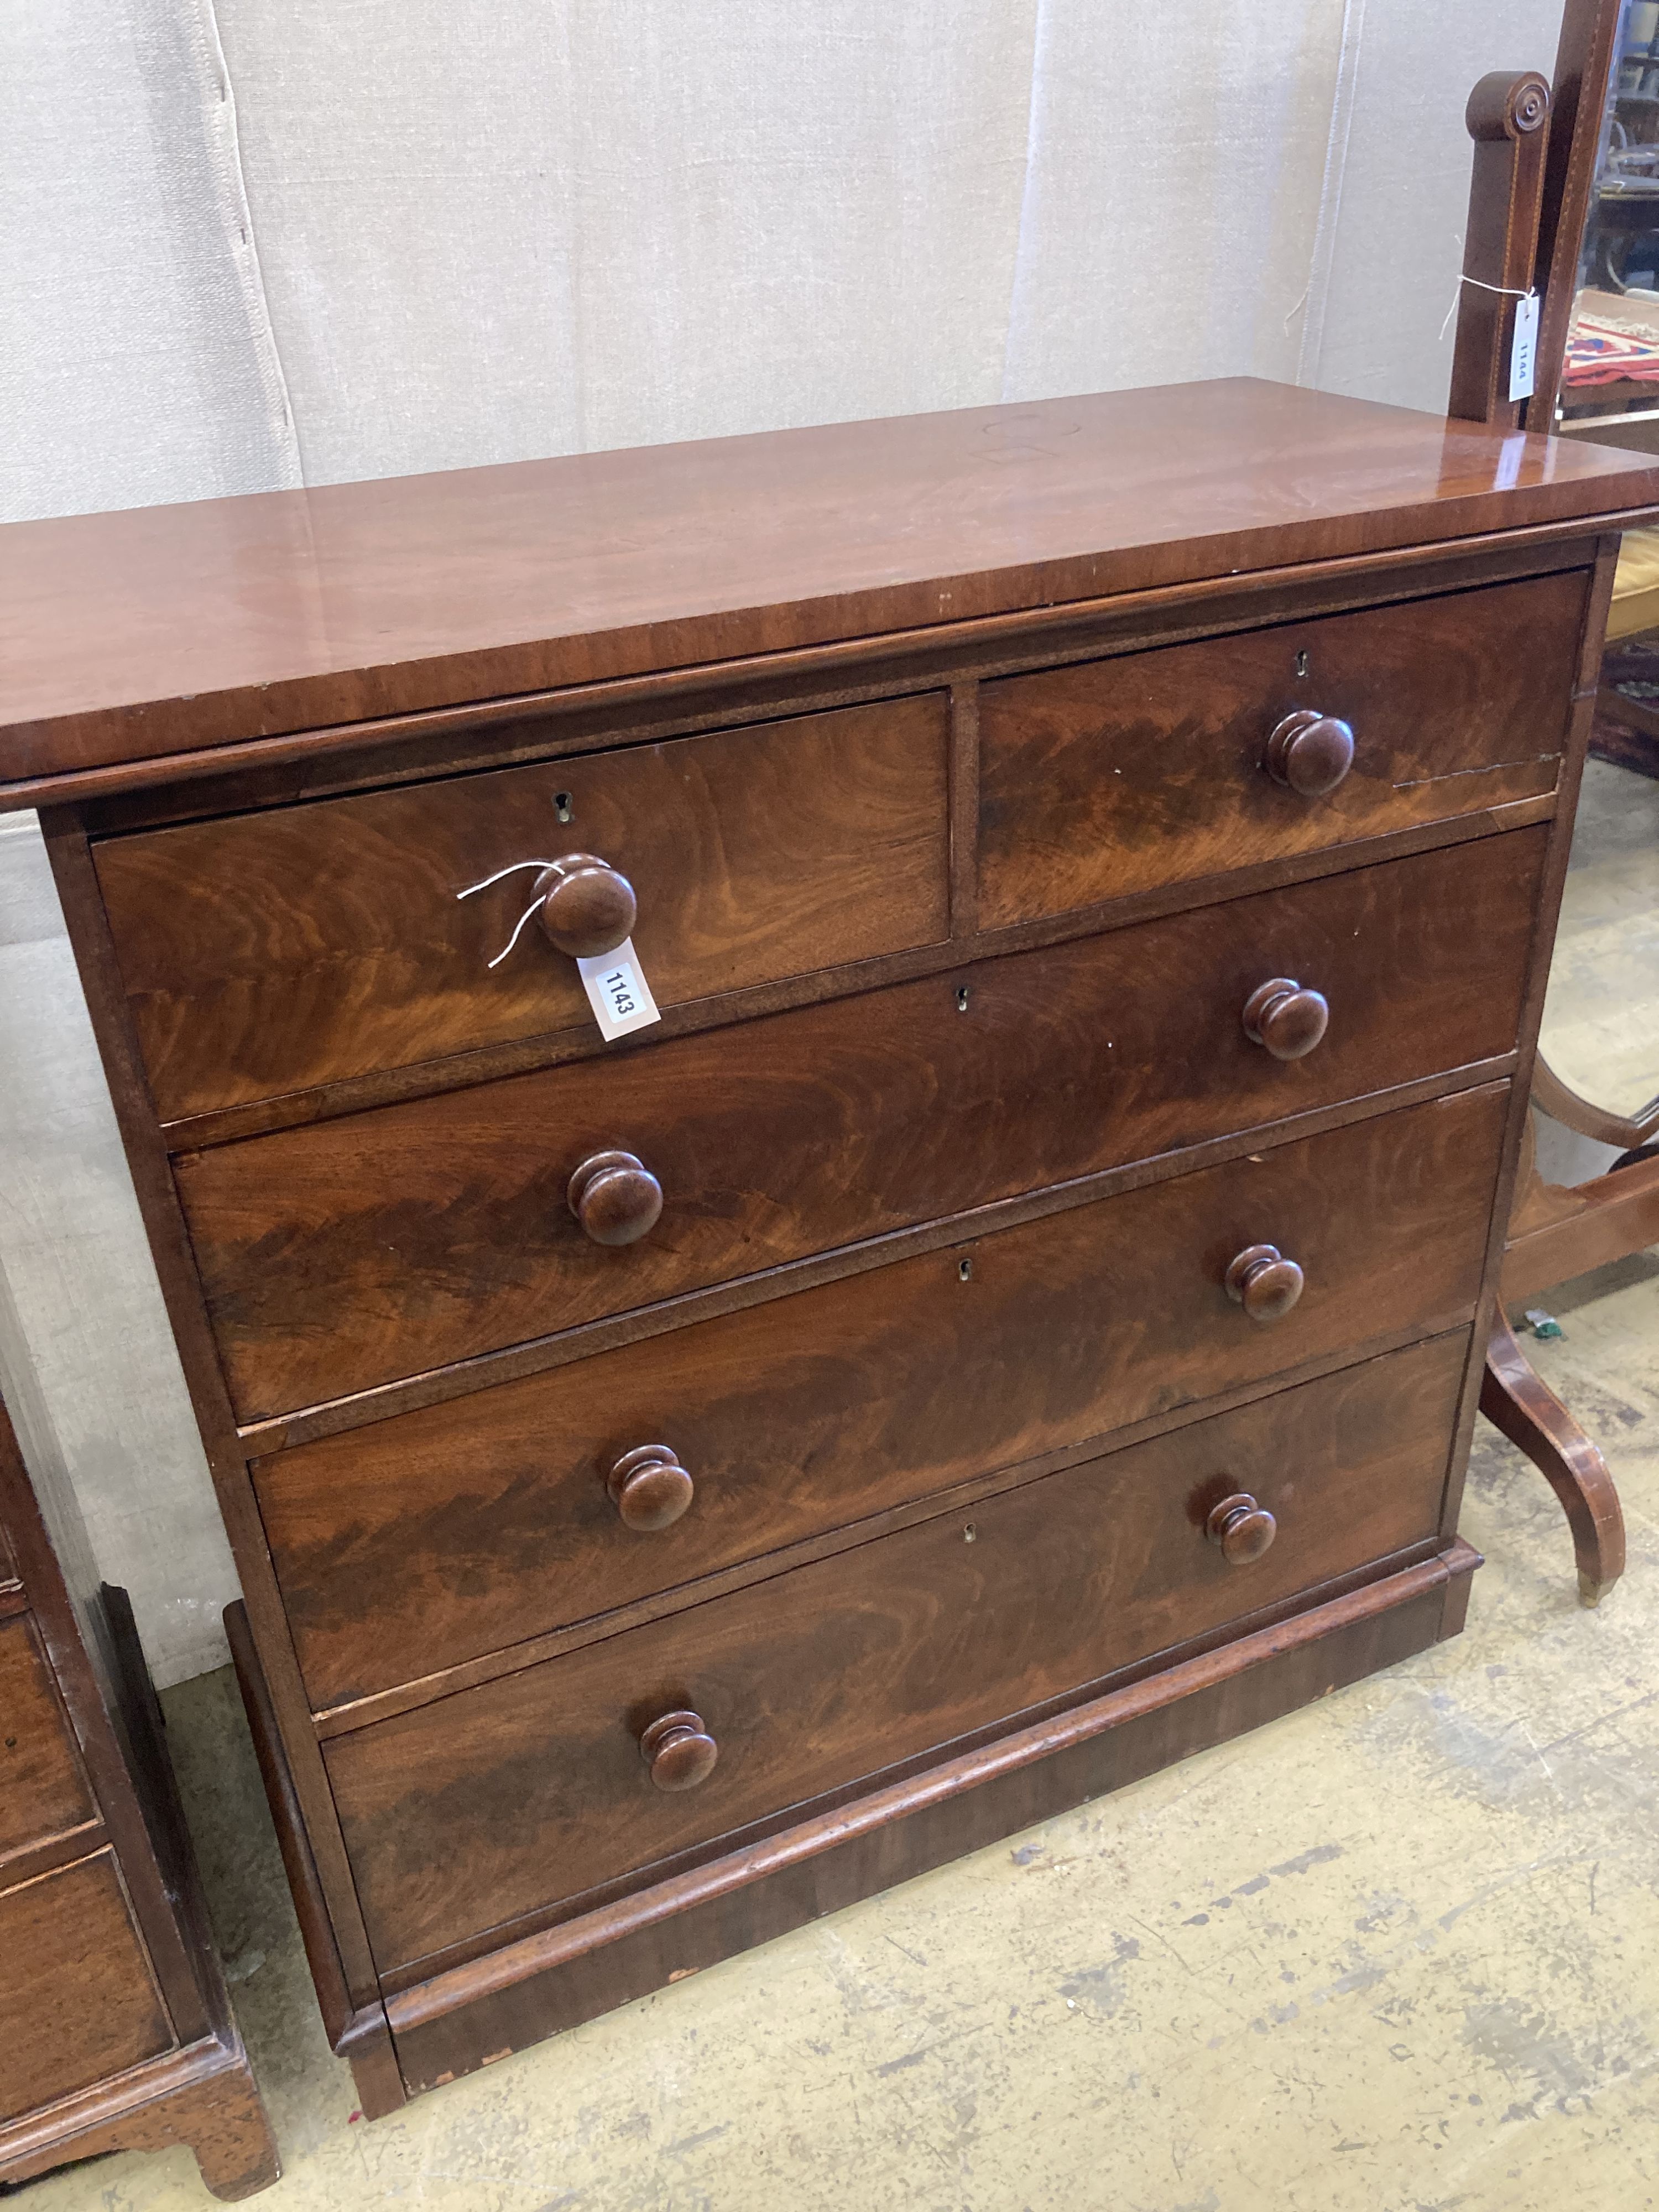 A Victorian mahogany chest of drawers, width 109cm, depth 50cm, height 112cm